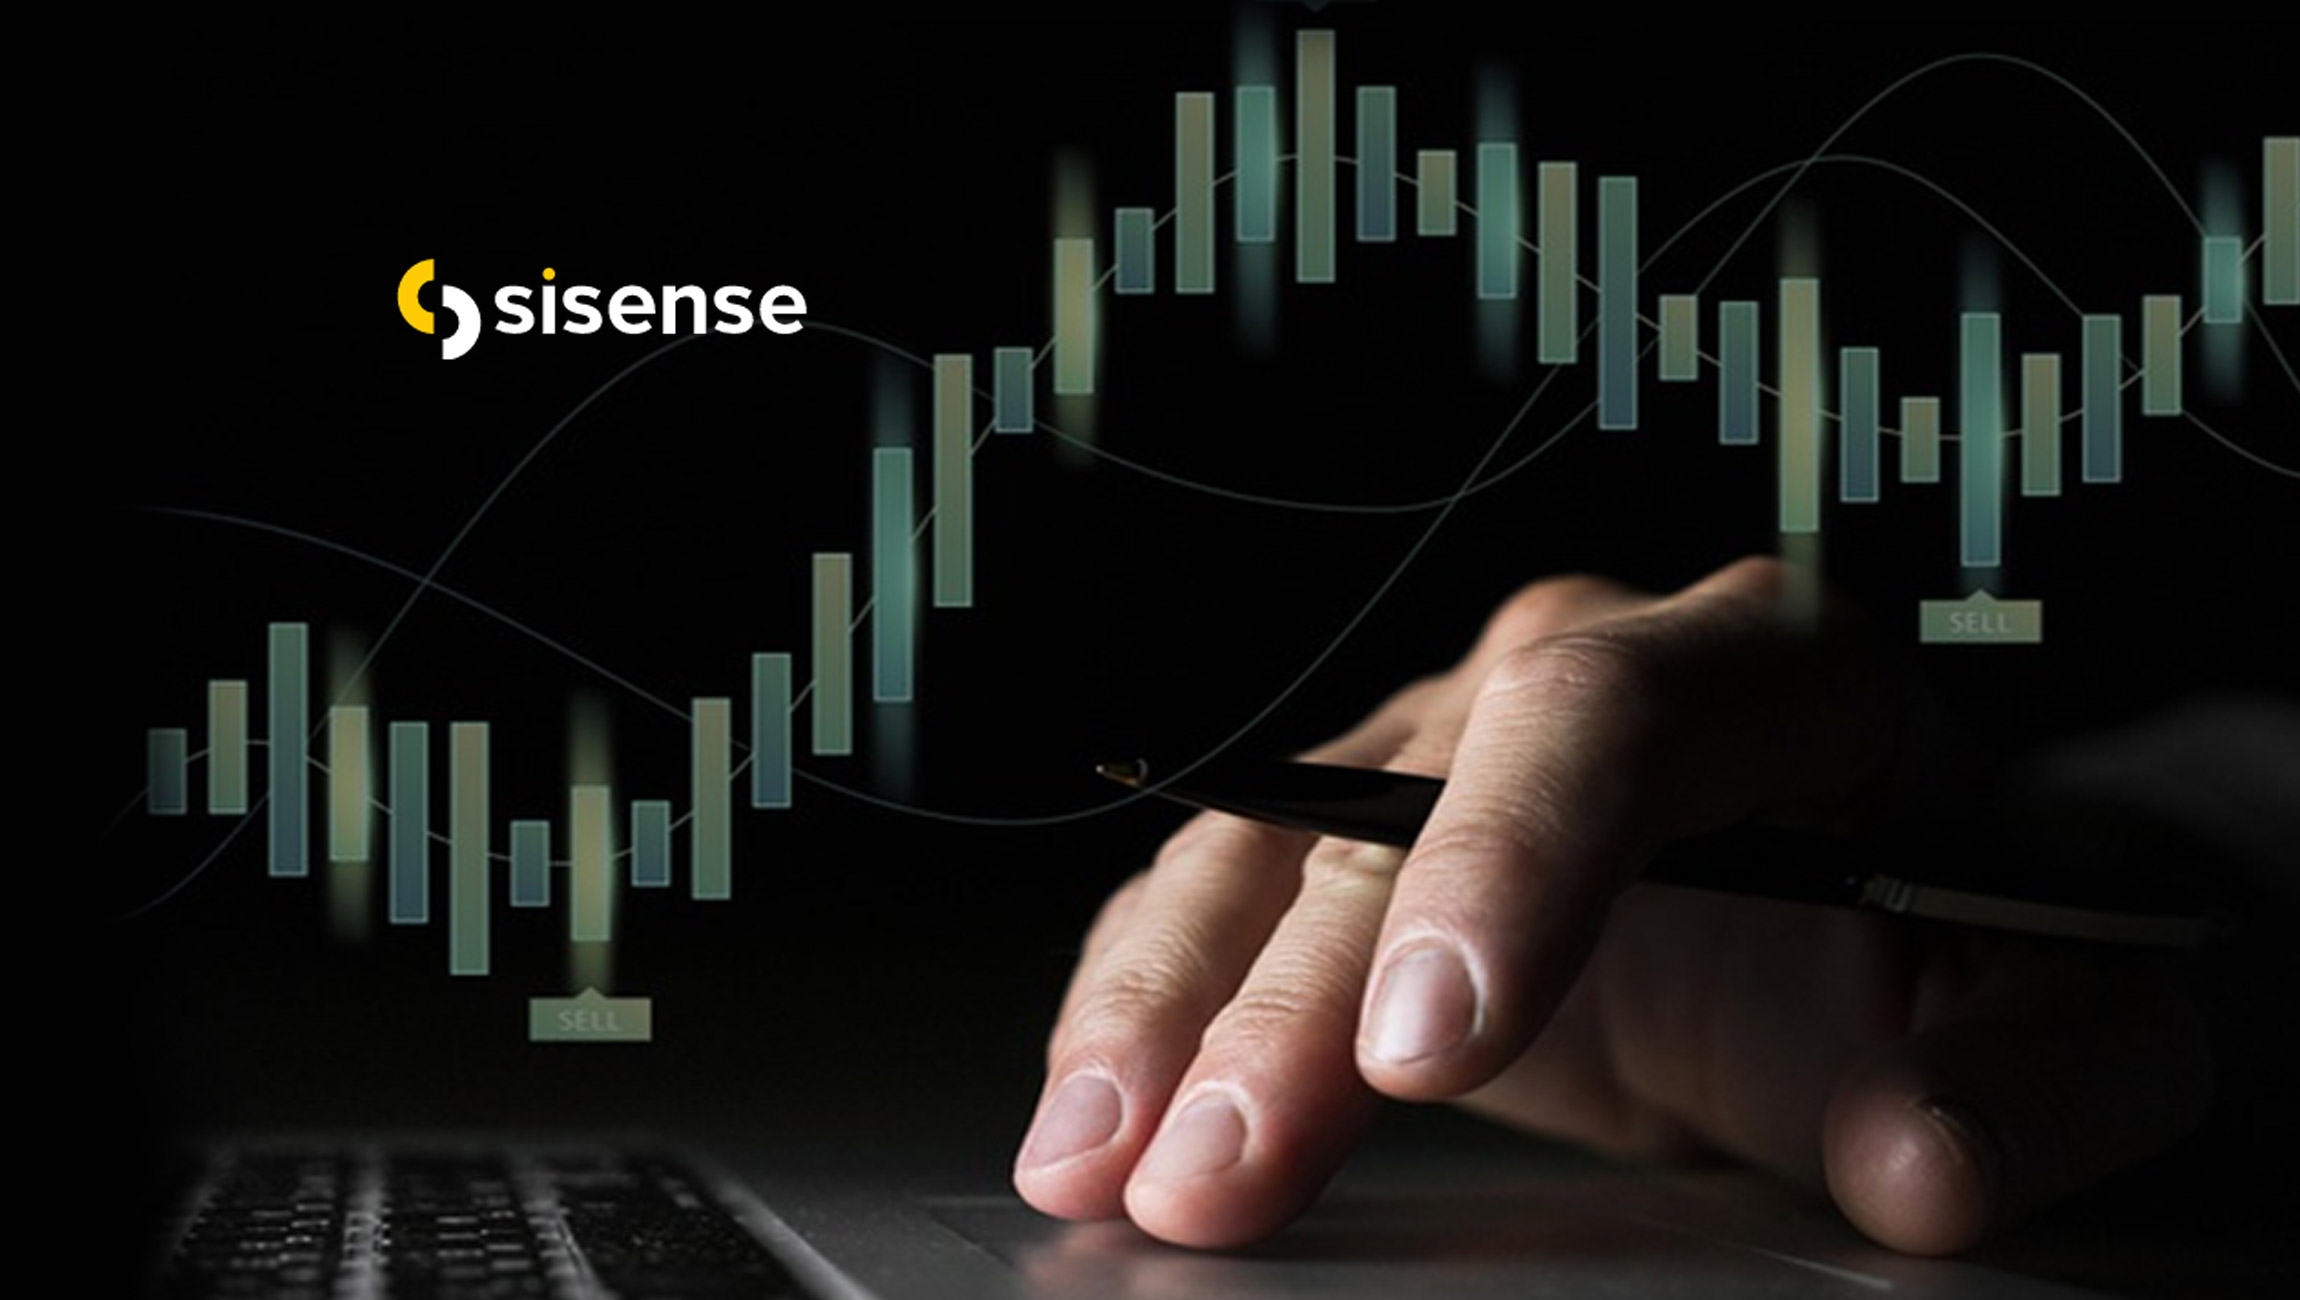 Sisense Unveils Sisense Fusion, an AI-Driven Analytics Platform Designed to Make Data Analytics Simple, Scalable and Actionable